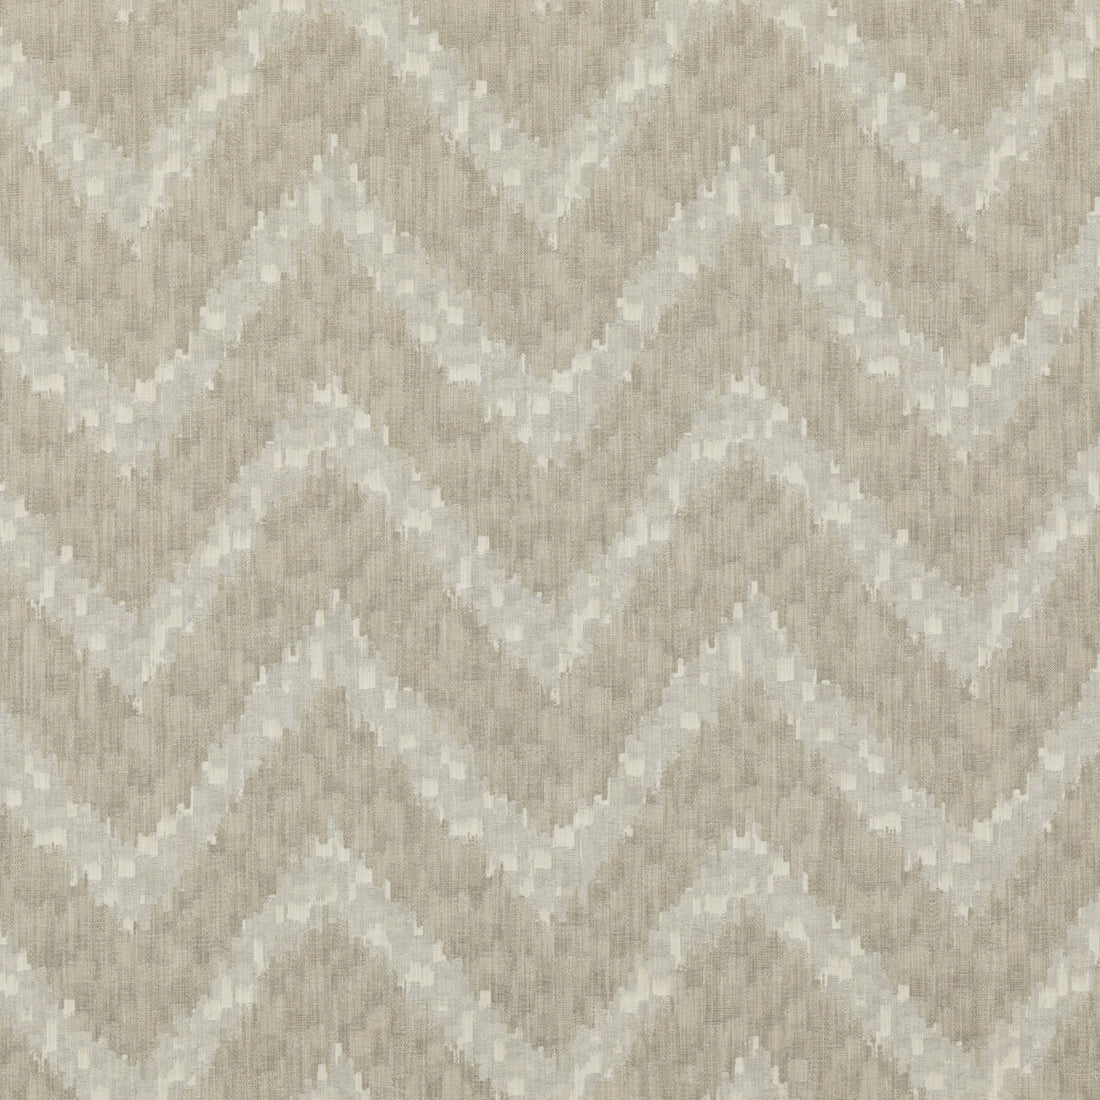 Ashburn fabric in parchment color - pattern FD773.J107.0 - by Mulberry in the Modern Country collection